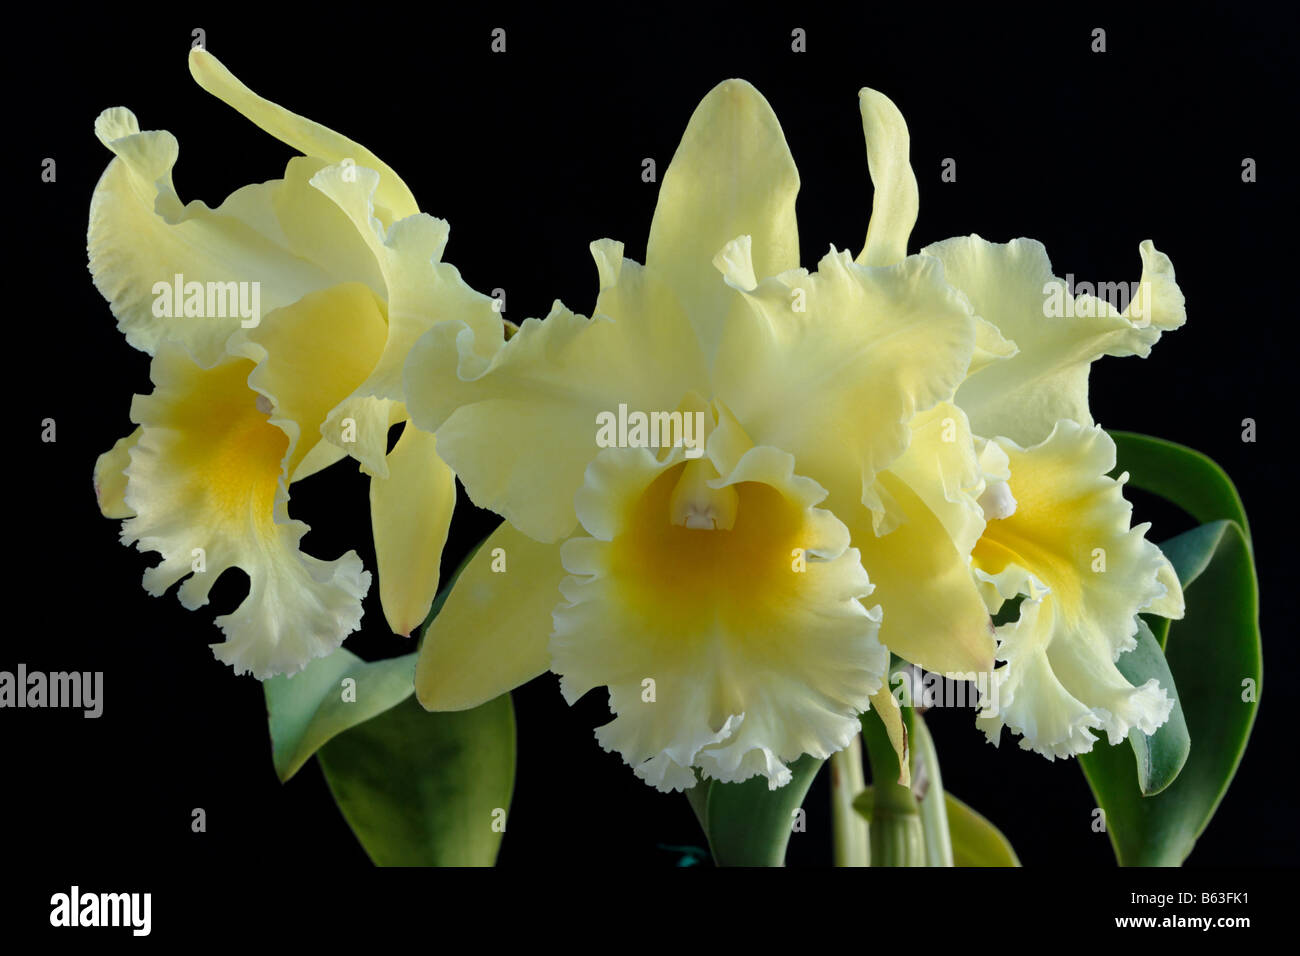 Cattleya Orchid flowers Stock Photo